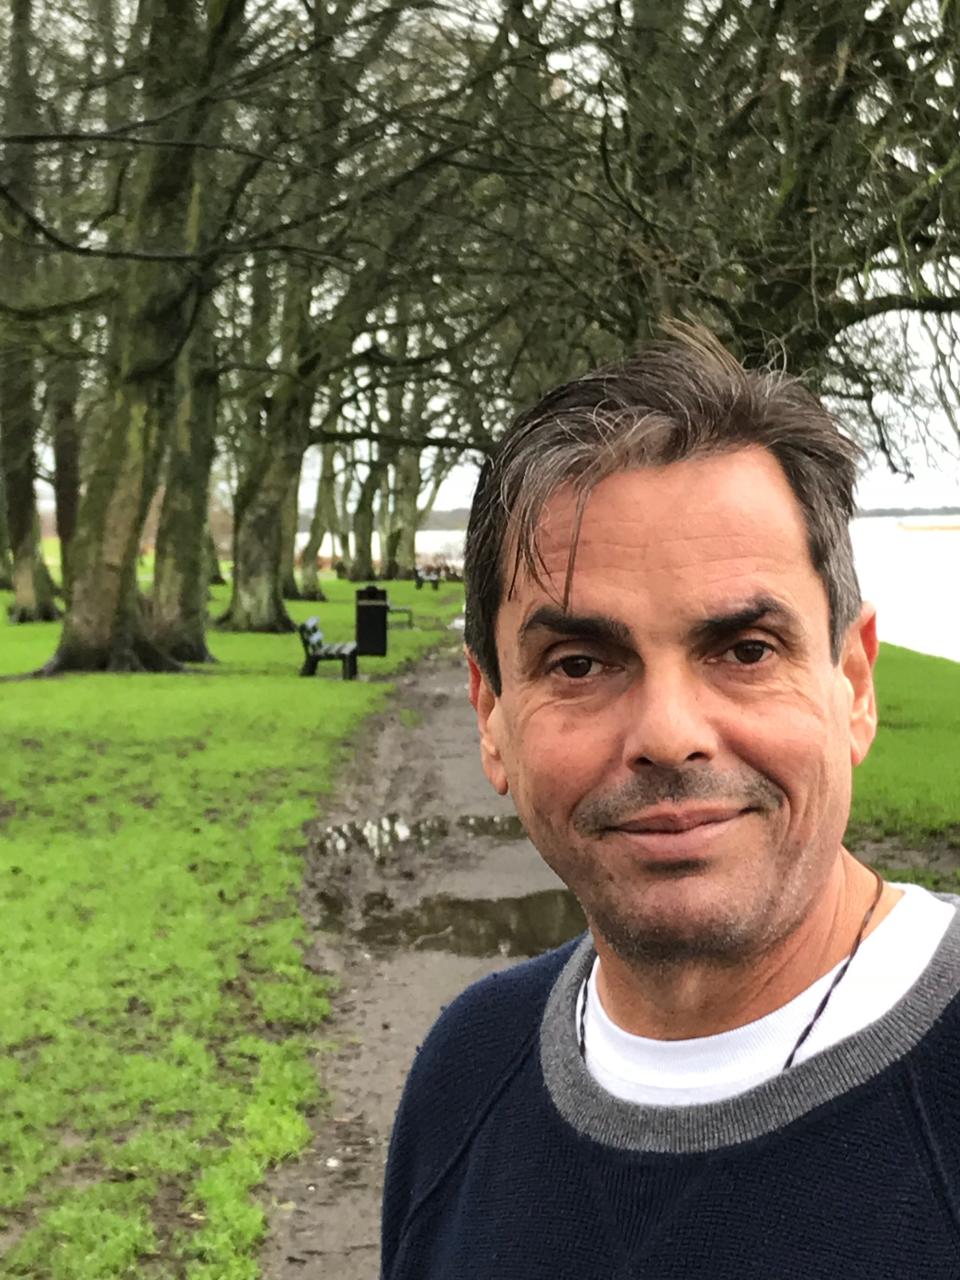 Jorge Diaz Johnston poses for a picture during a trip to Ireland in 2017. He and his husband, Don Price Johnston, were among several gay couples who challenged Florida's ban on same-sex marriage and won major court victories in 2014. Jorge was found dead Jan. 8, the victim of a homicide.